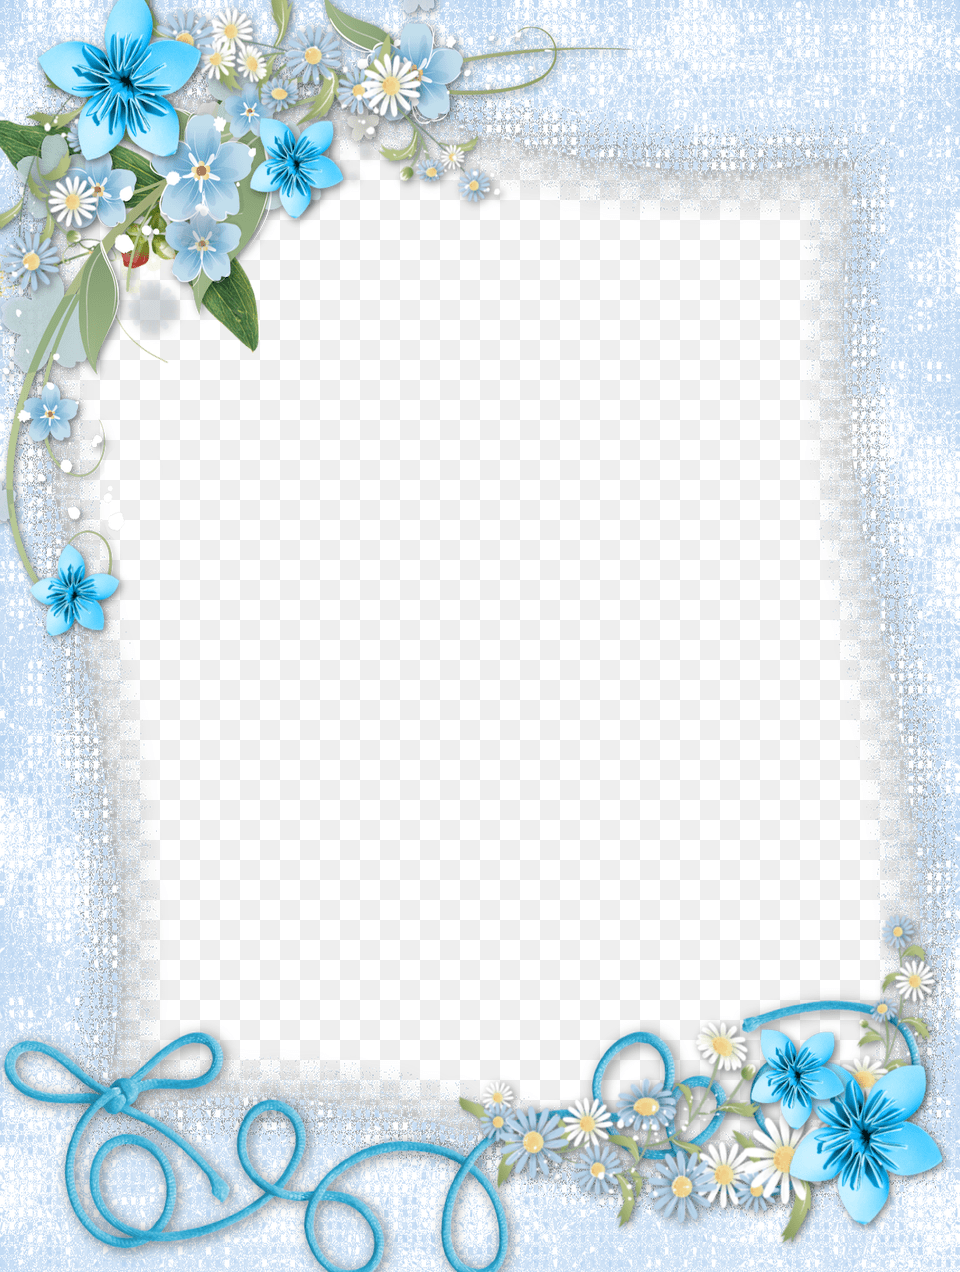 Blue Border With Corner Flower Accents Castello Aragonese, Pattern Png Image